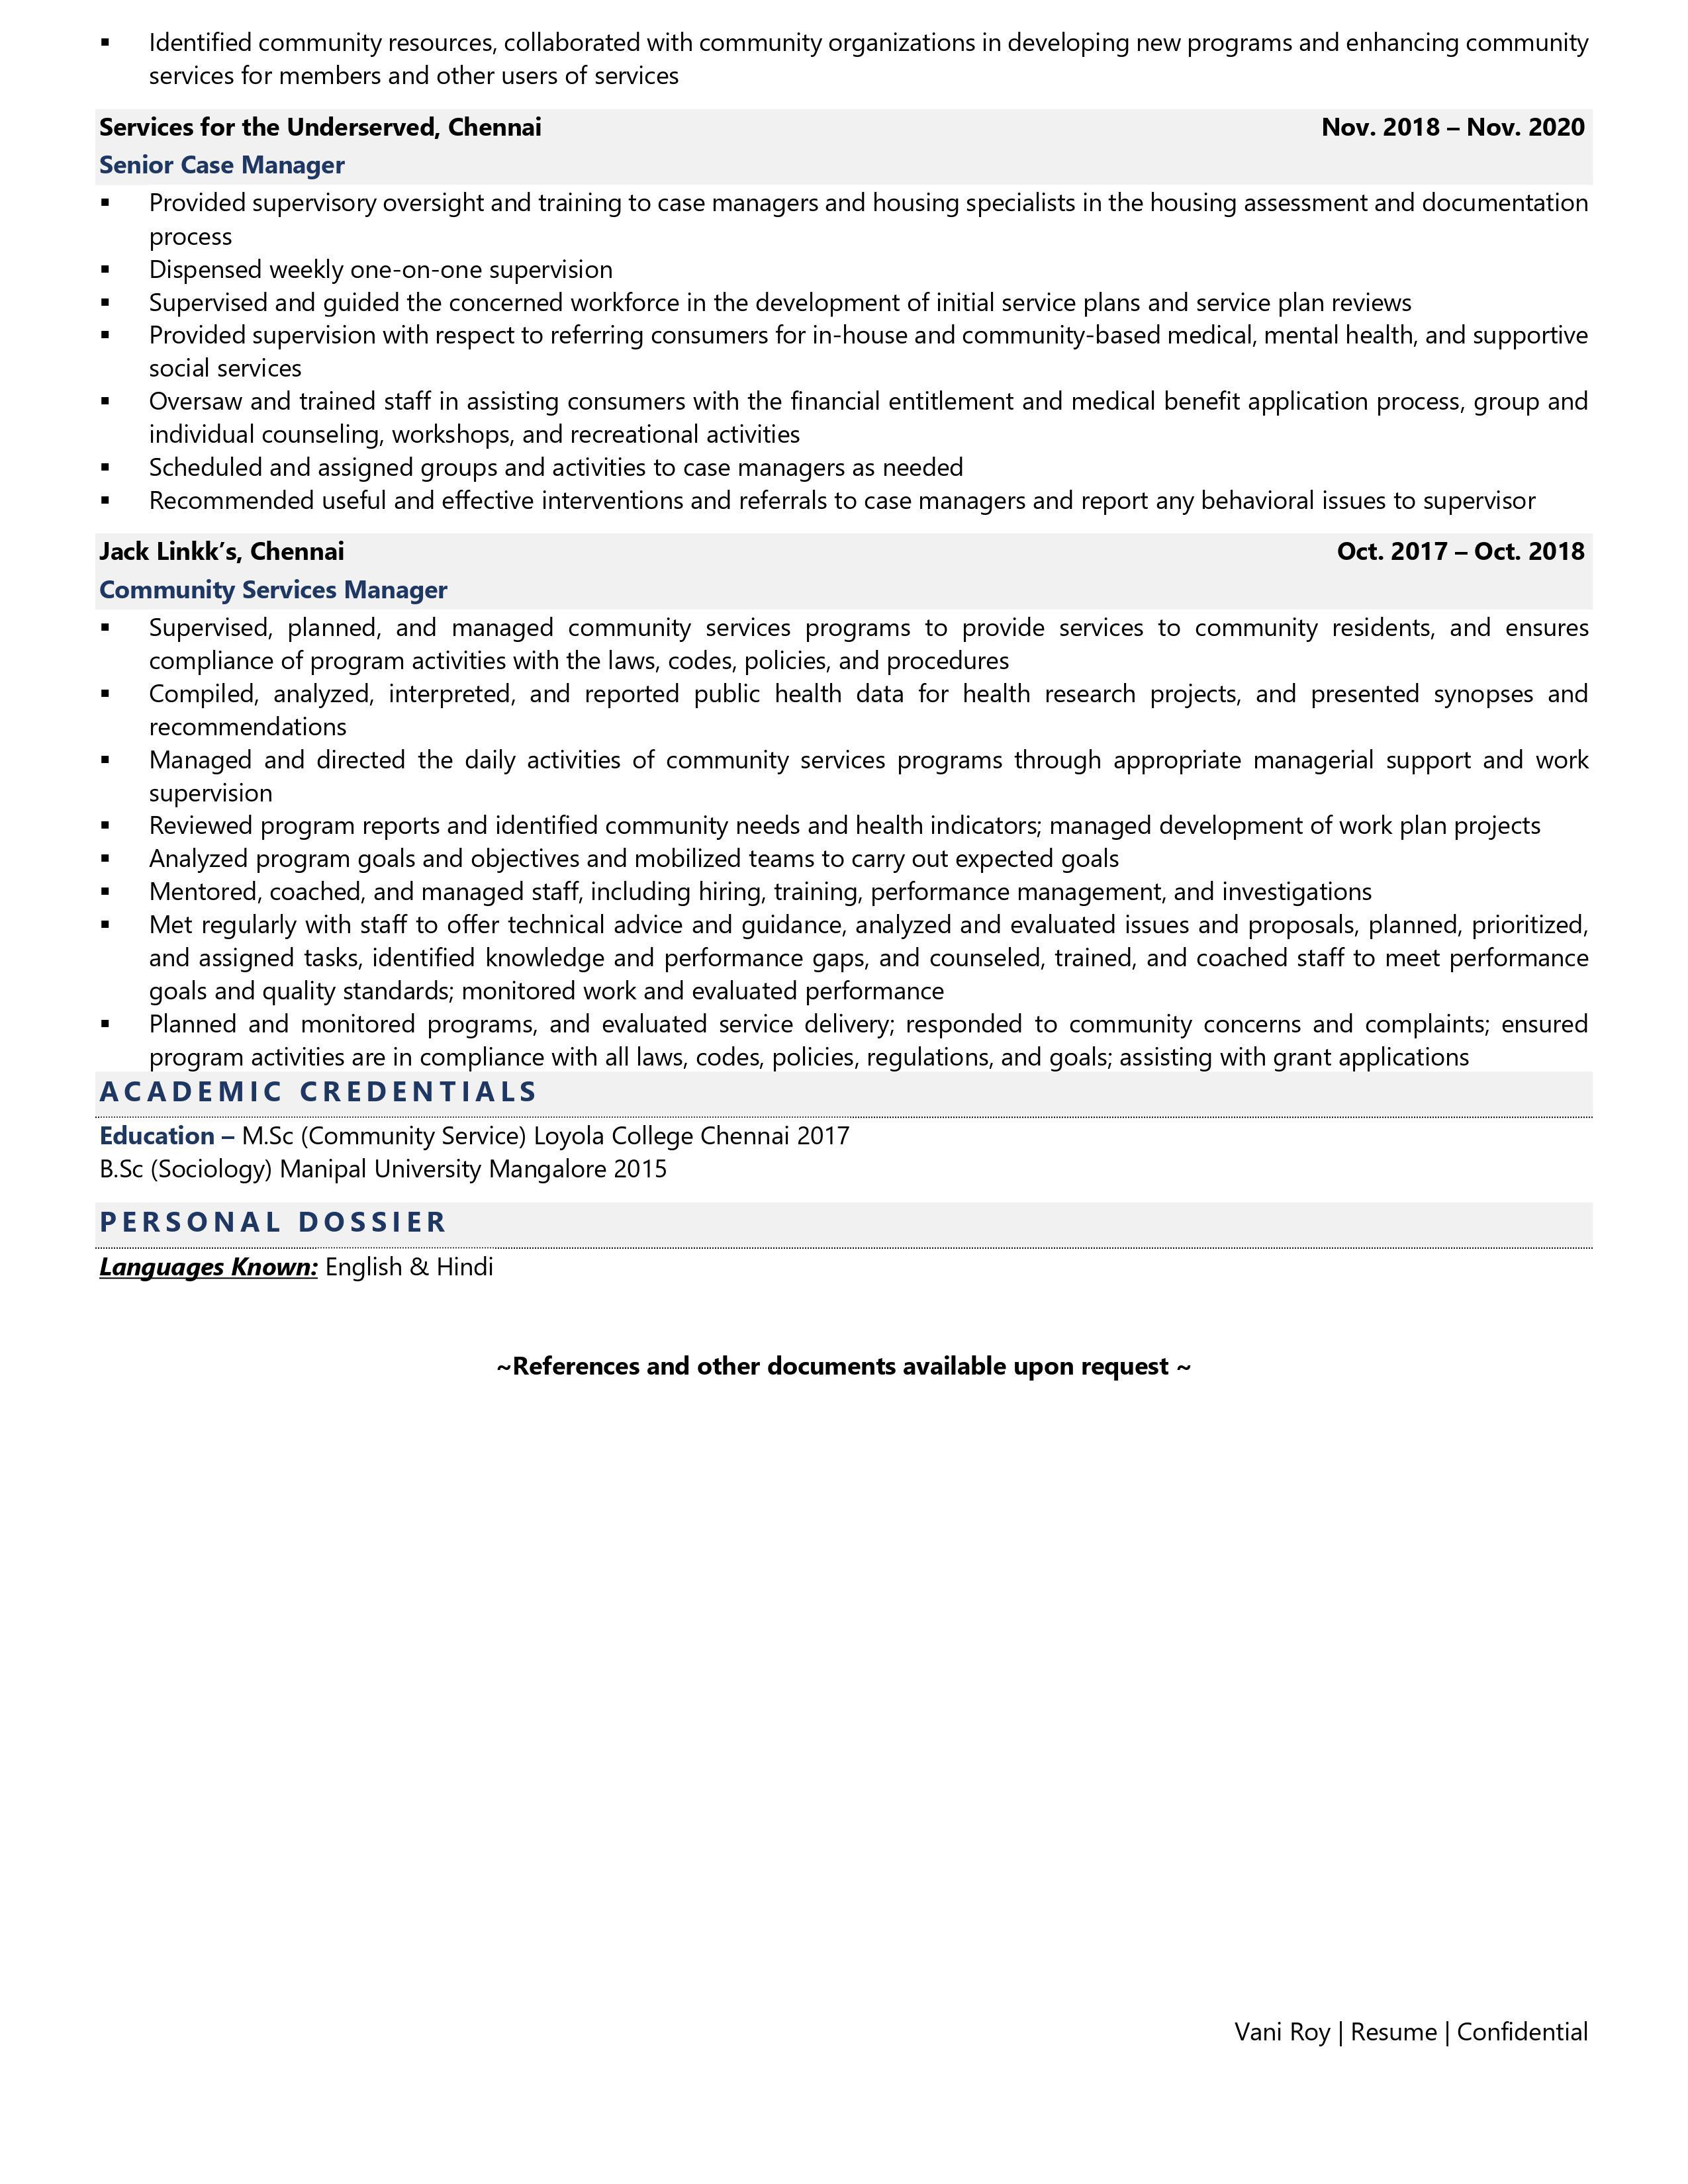 Social and Community Service Manager - Resume Example & Template